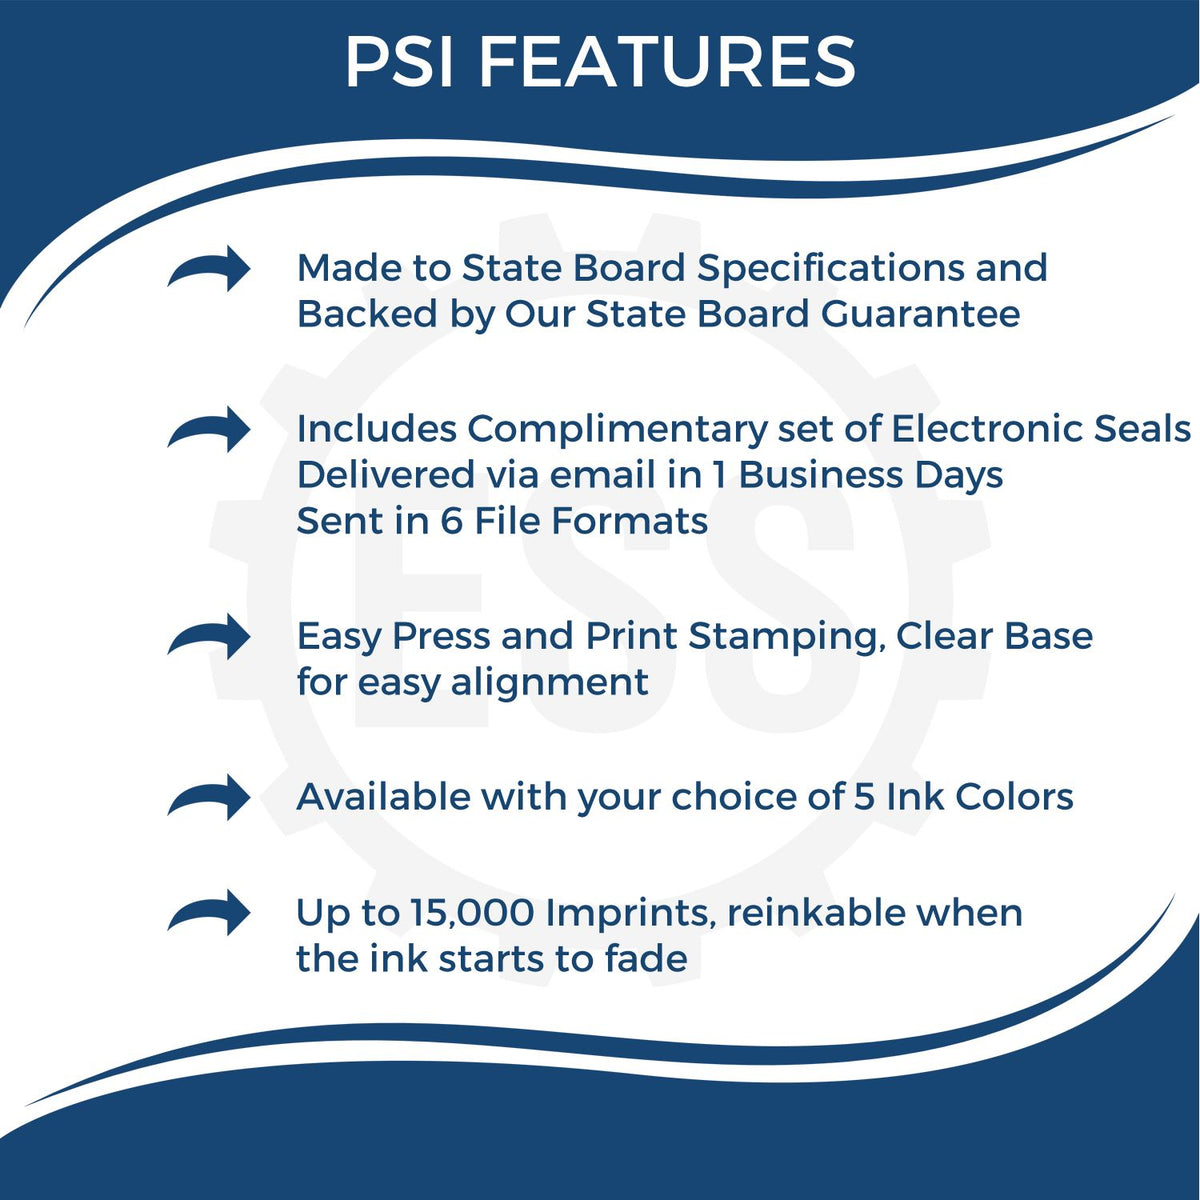 A picture of an infographic highlighting the selling points for the PSI Kansas Notary Stamp